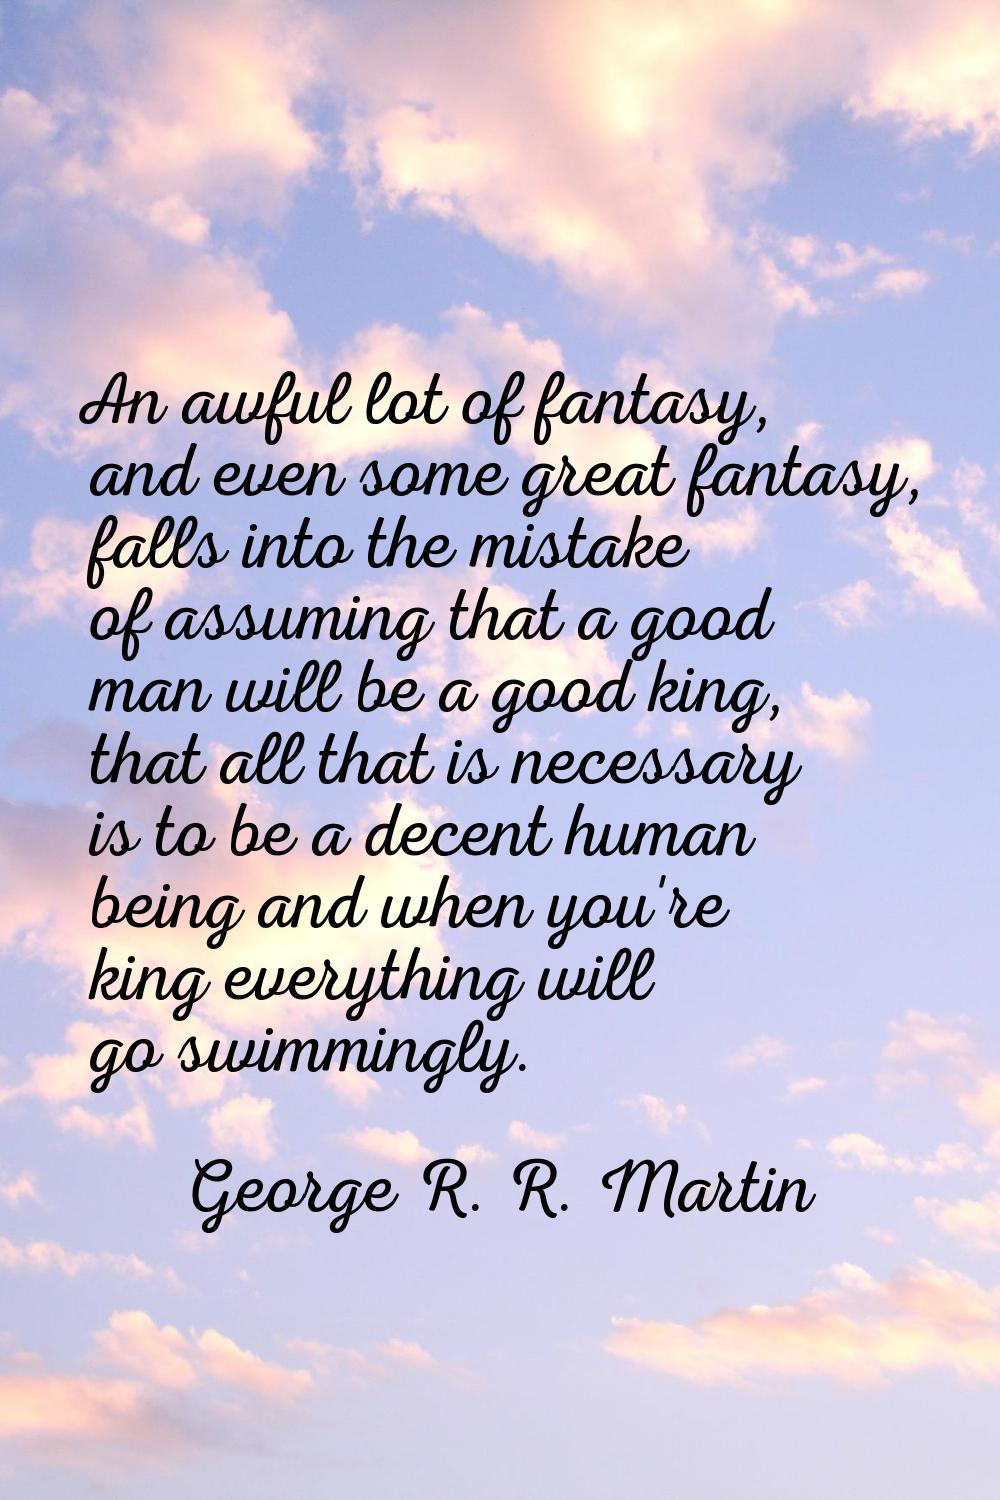 An awful lot of fantasy, and even some great fantasy, falls into the mistake of assuming that a goo